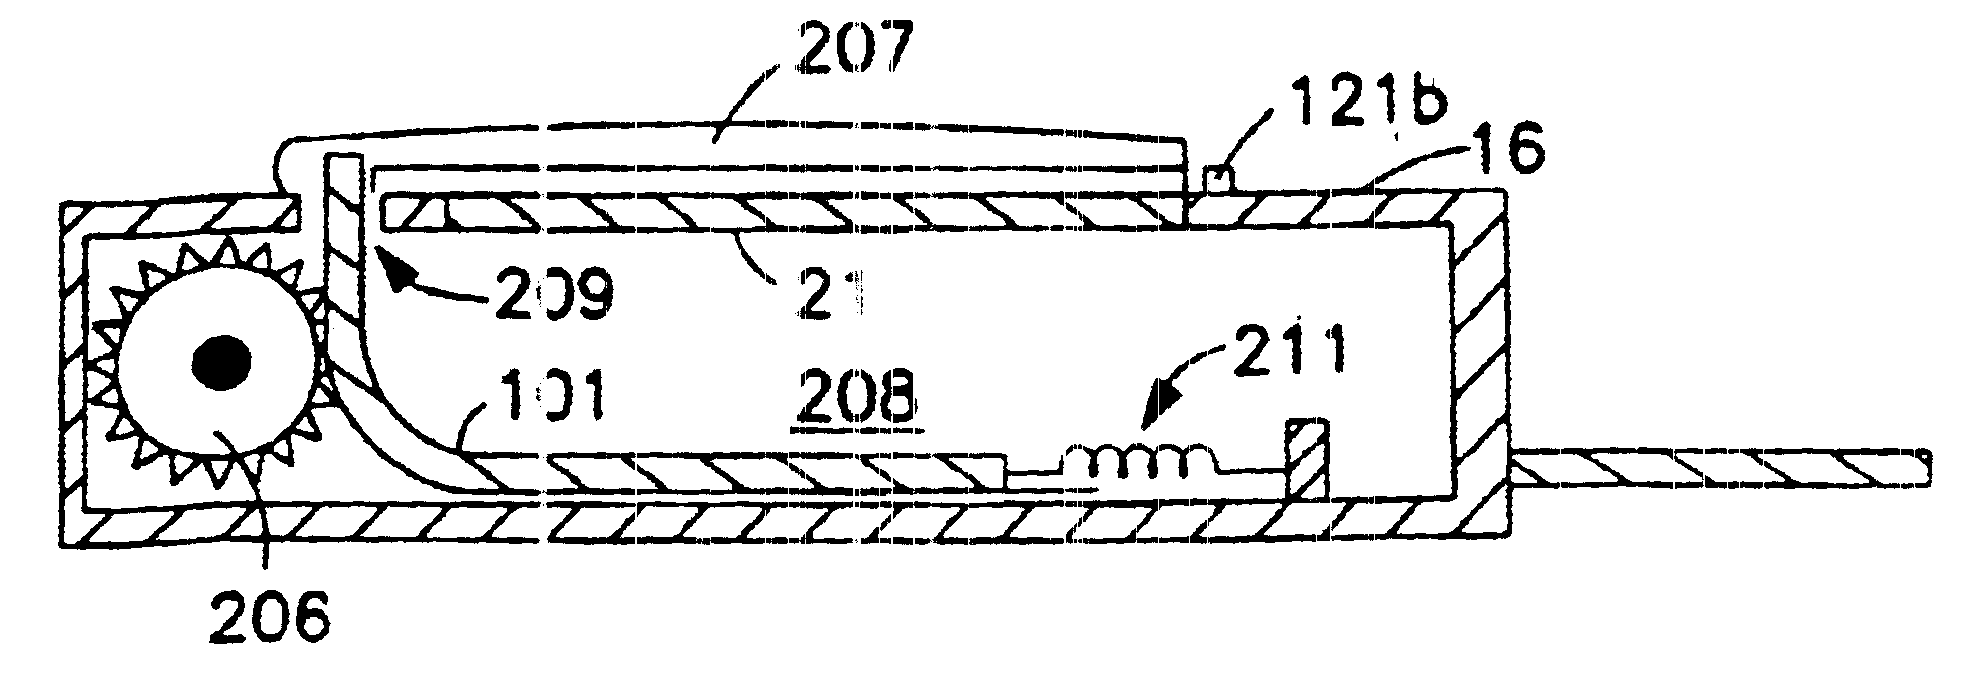 Touch screen overlay apparatus